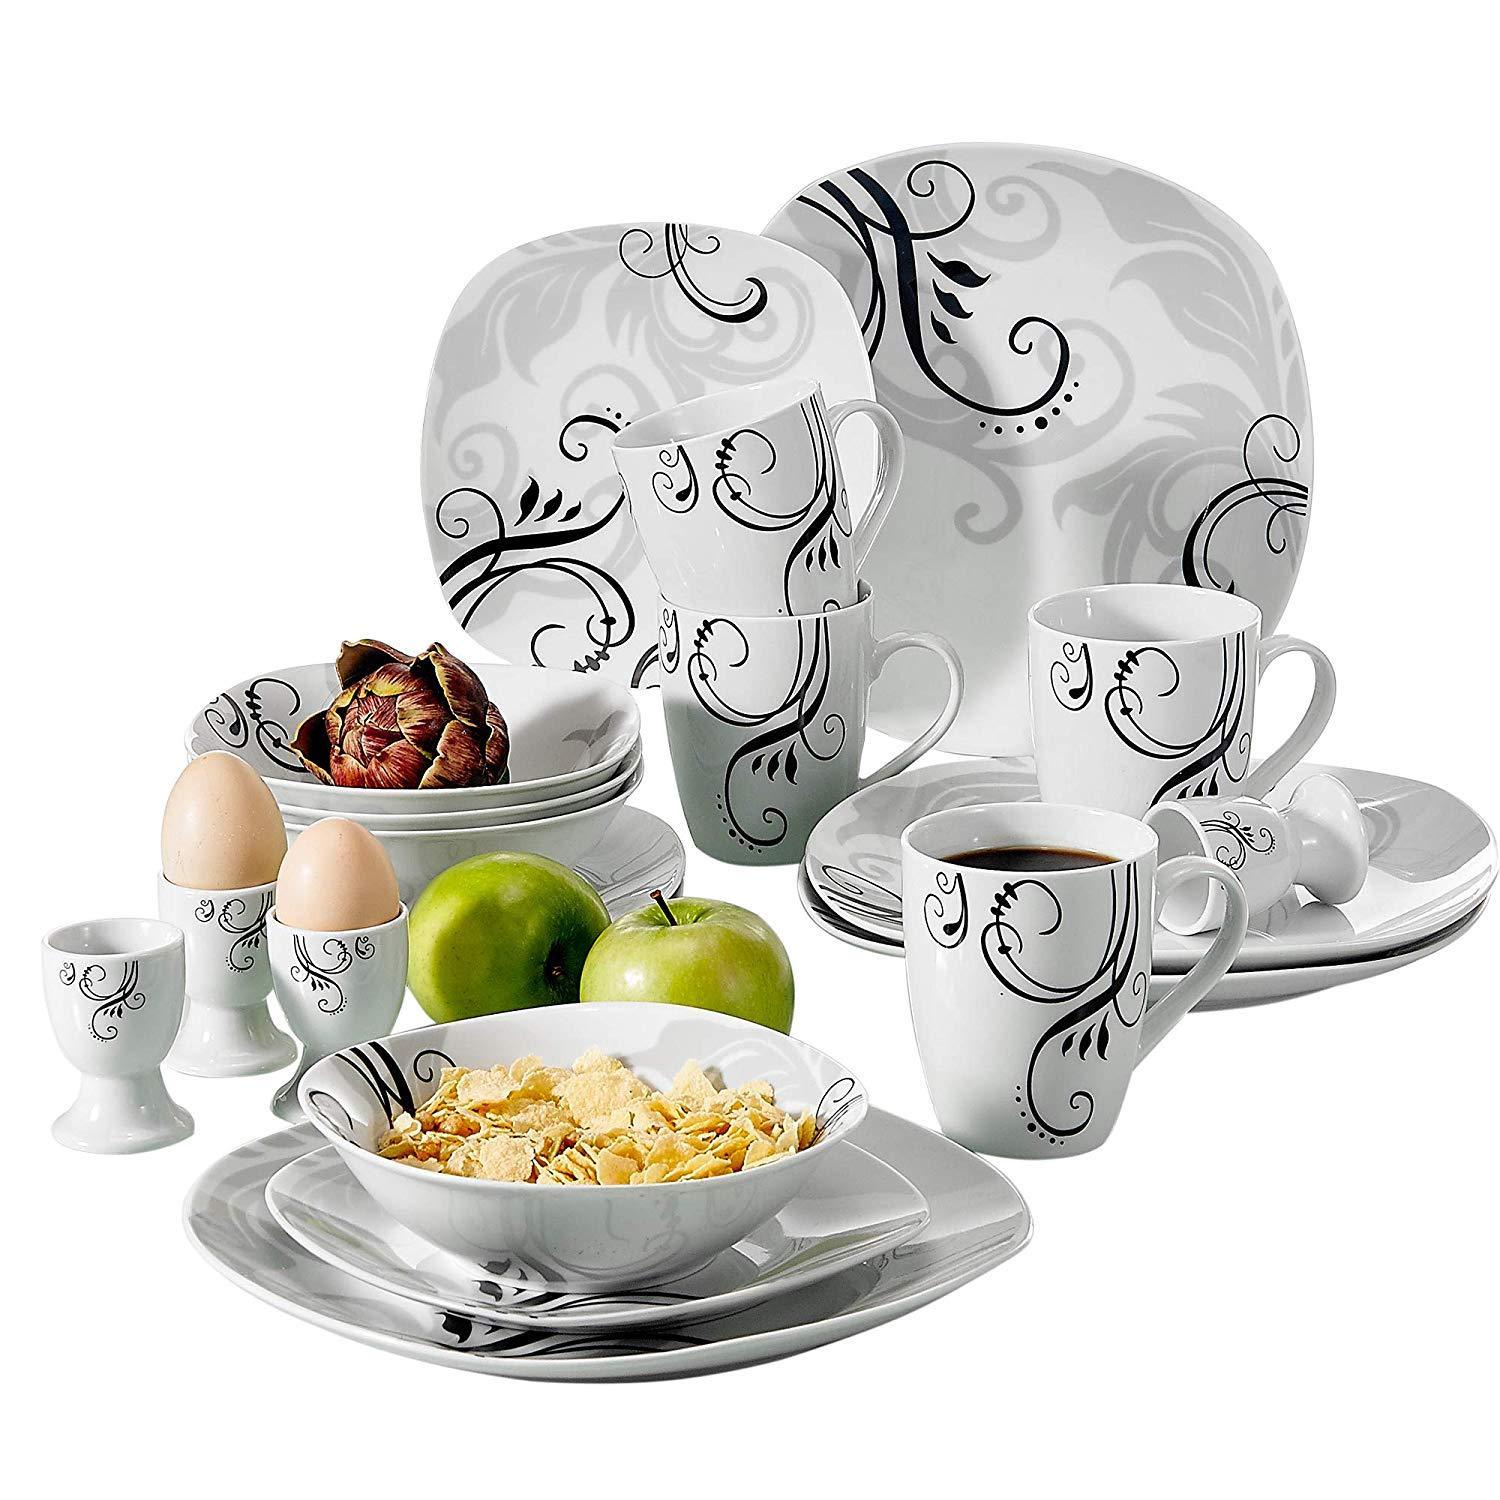 ZOEY 20-Piece Porcelain Tableware Set Decal Pattern Dinnerware Sets with Dinner Plate,Dessert Plate,Bowl,Mug,Egg Cup - Nordic Side - 20, Cup, Decal, Dinner, Dinnerware, Pattern, Piece, PlateB